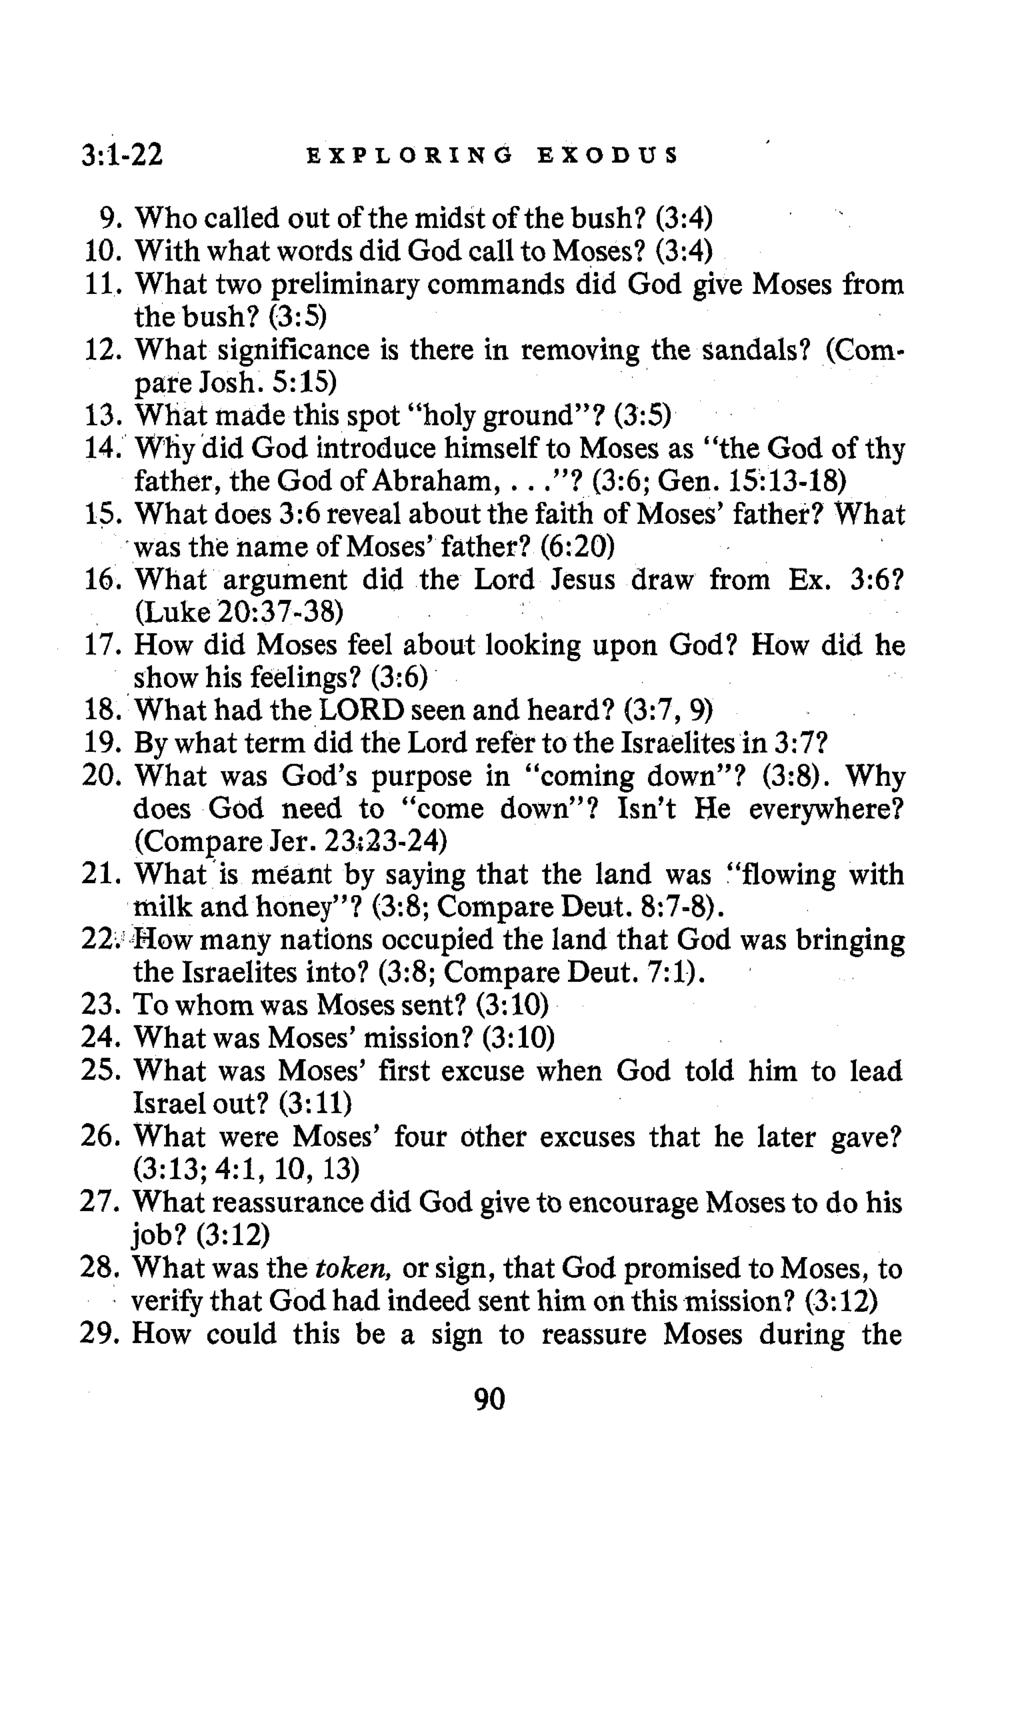 3:1-22 EXPLORING EXODUS 9. Who called out of the midst of the bush? (3:4) 10. With what words did God call to Moses? (3:4) 11. What two preliminary commands did God give Moses from the bush?